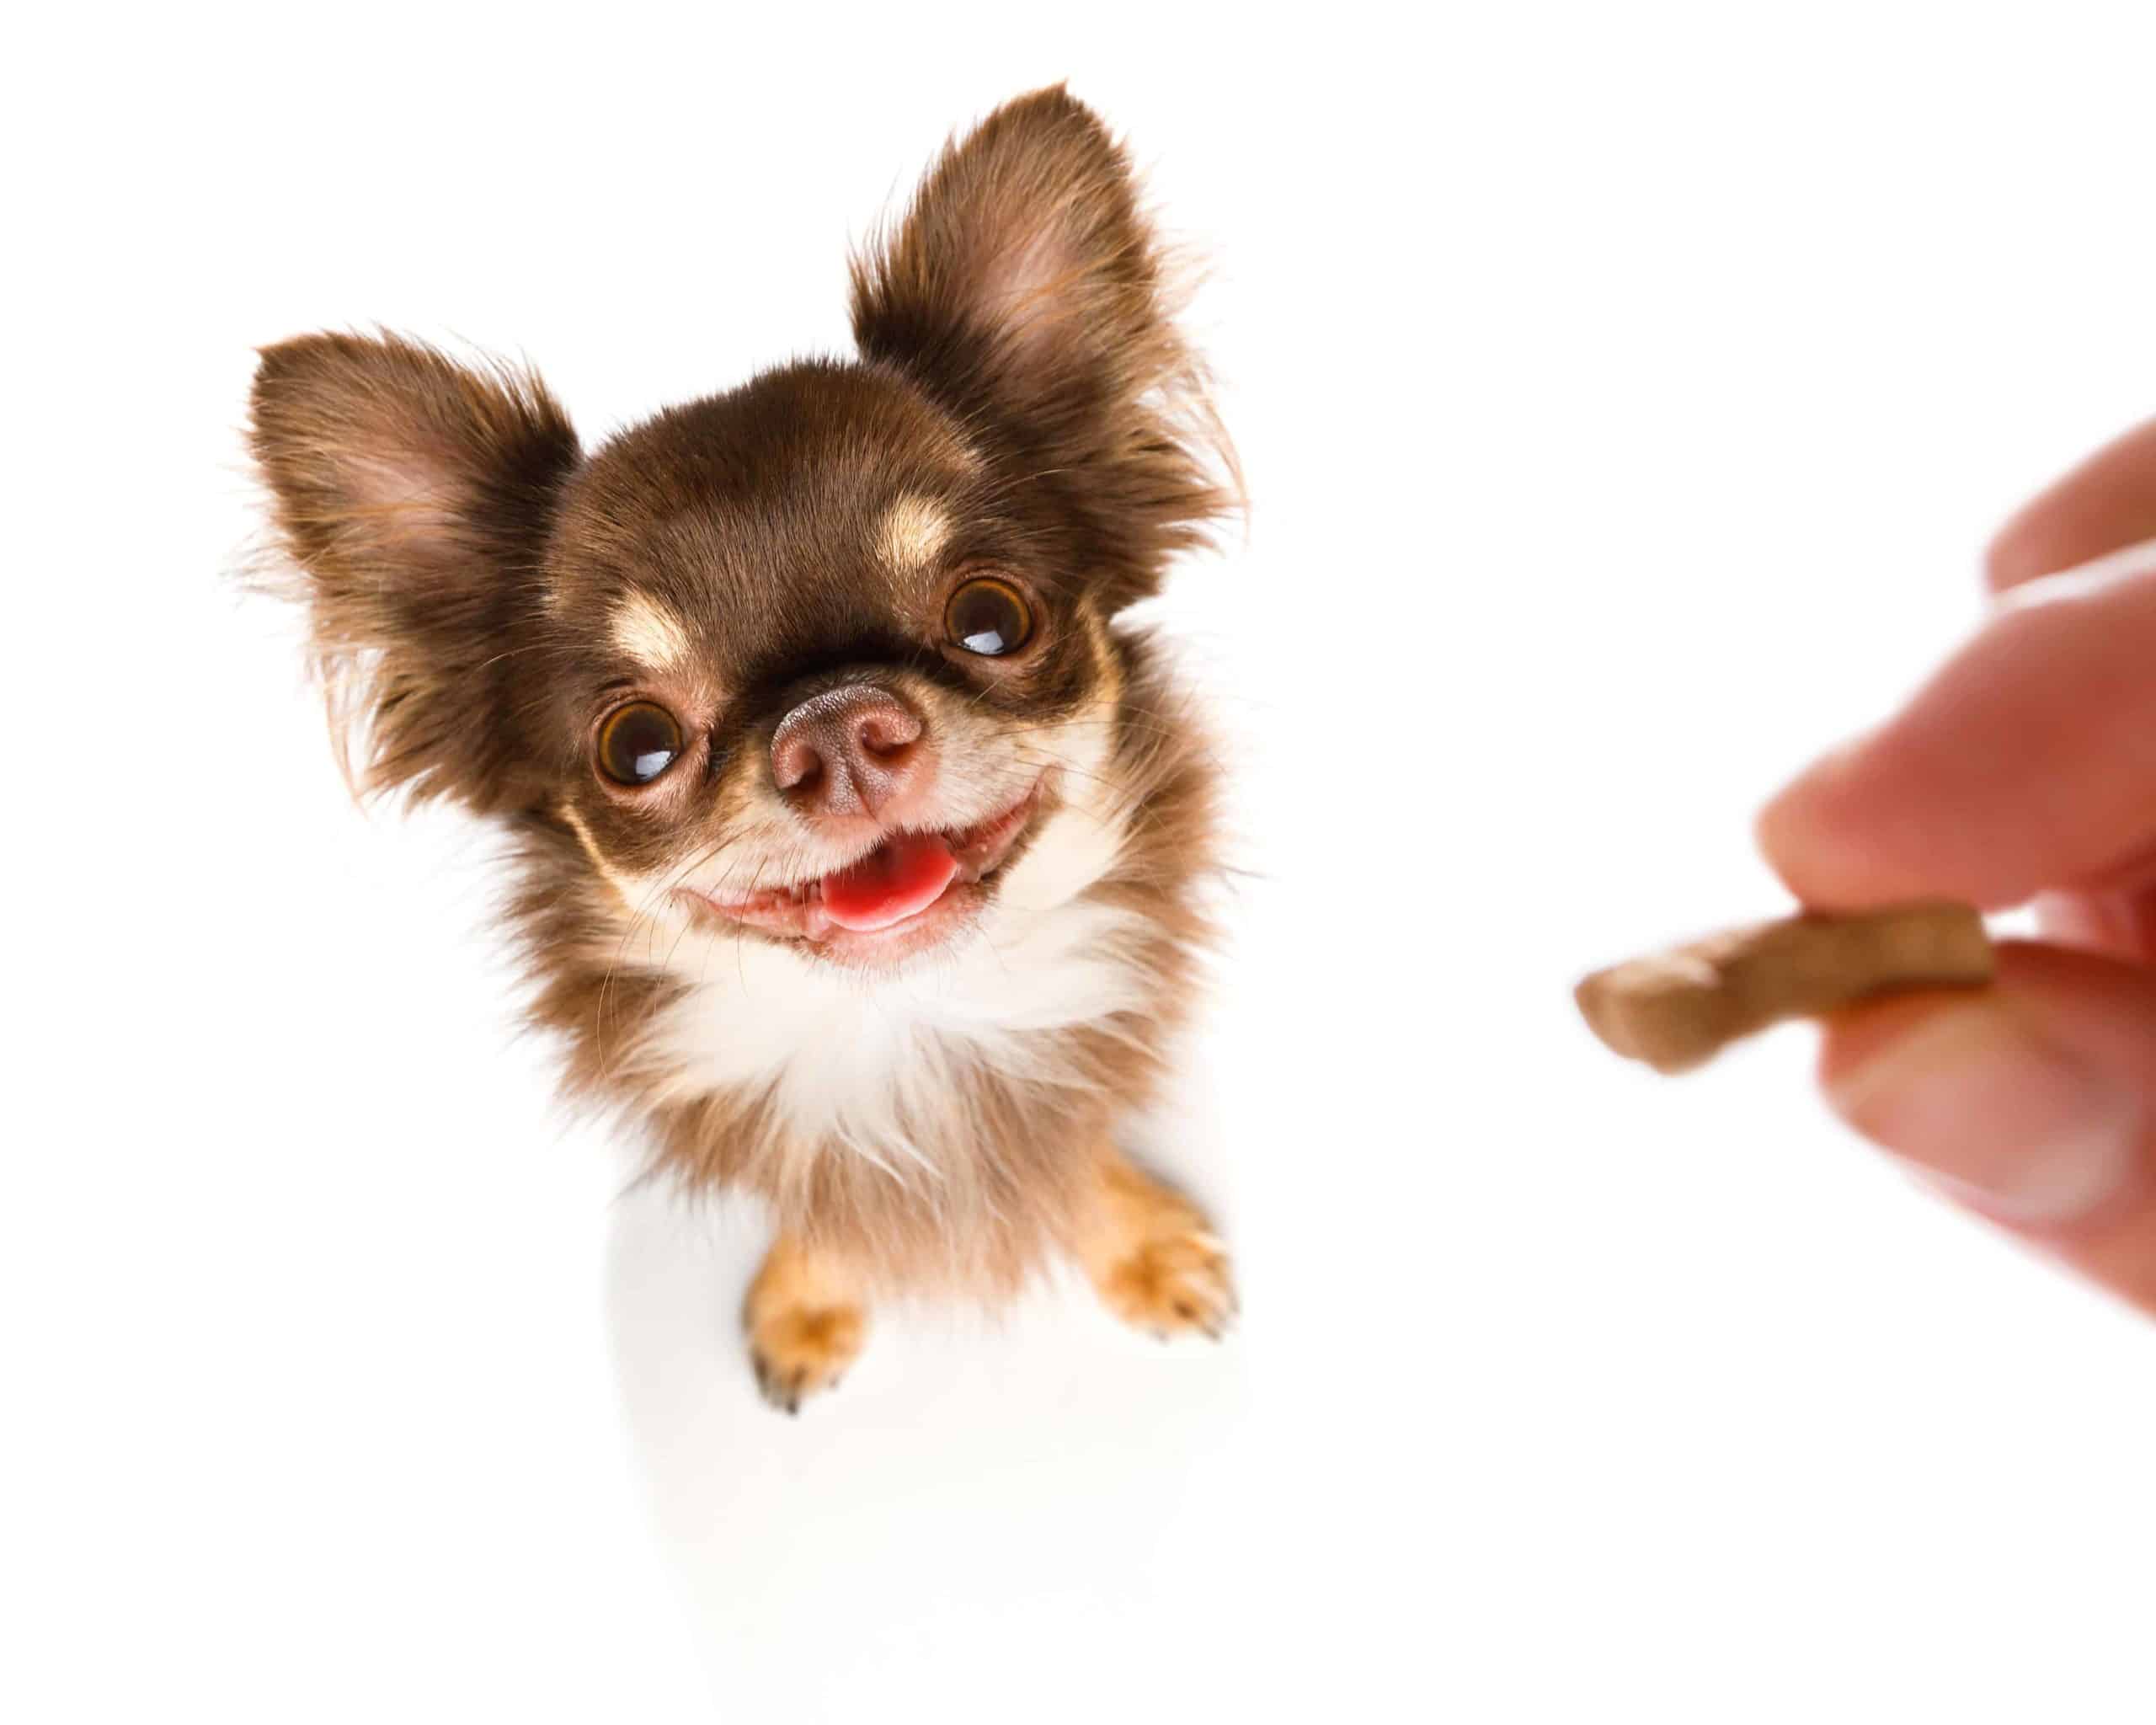 Owner gives Chihuahua a homemade dog treat. DIY dog treats are healthier since they don’t contain as many chemicals, fats, and preservatives as commercial dog treats.